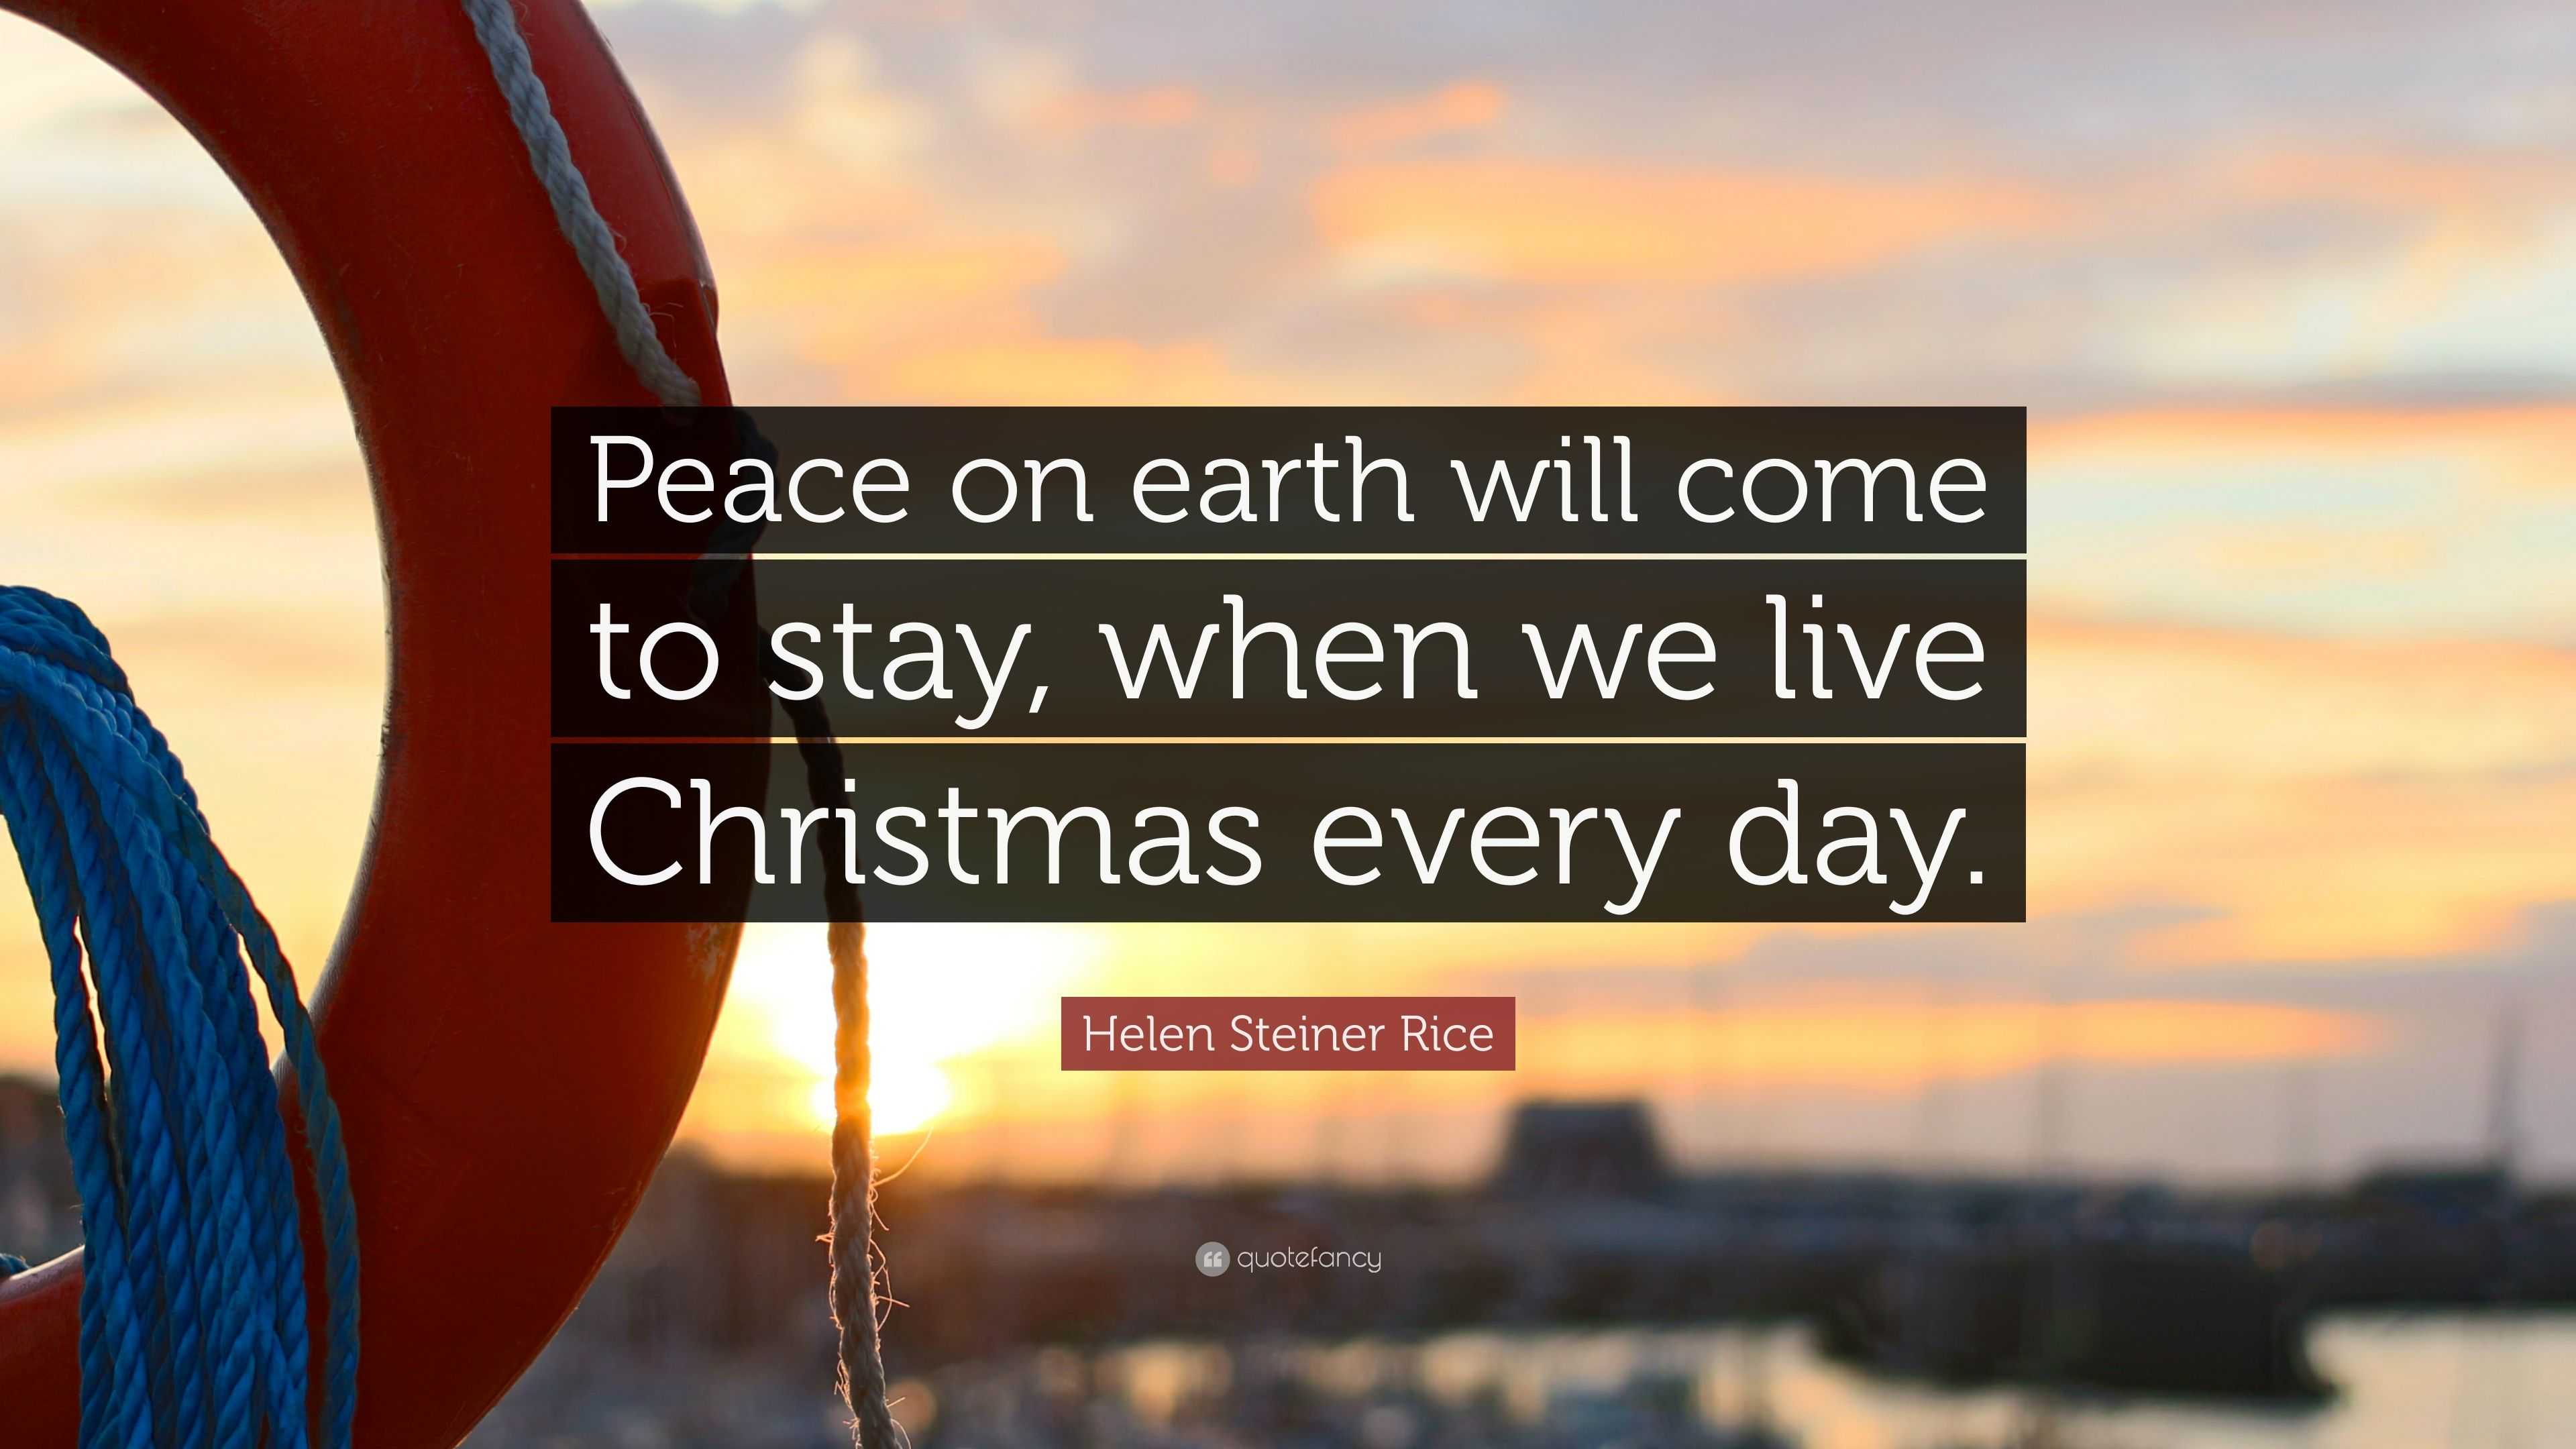 Helen Steiner Rice Quote: "Peace on earth will come to stay, when we ...